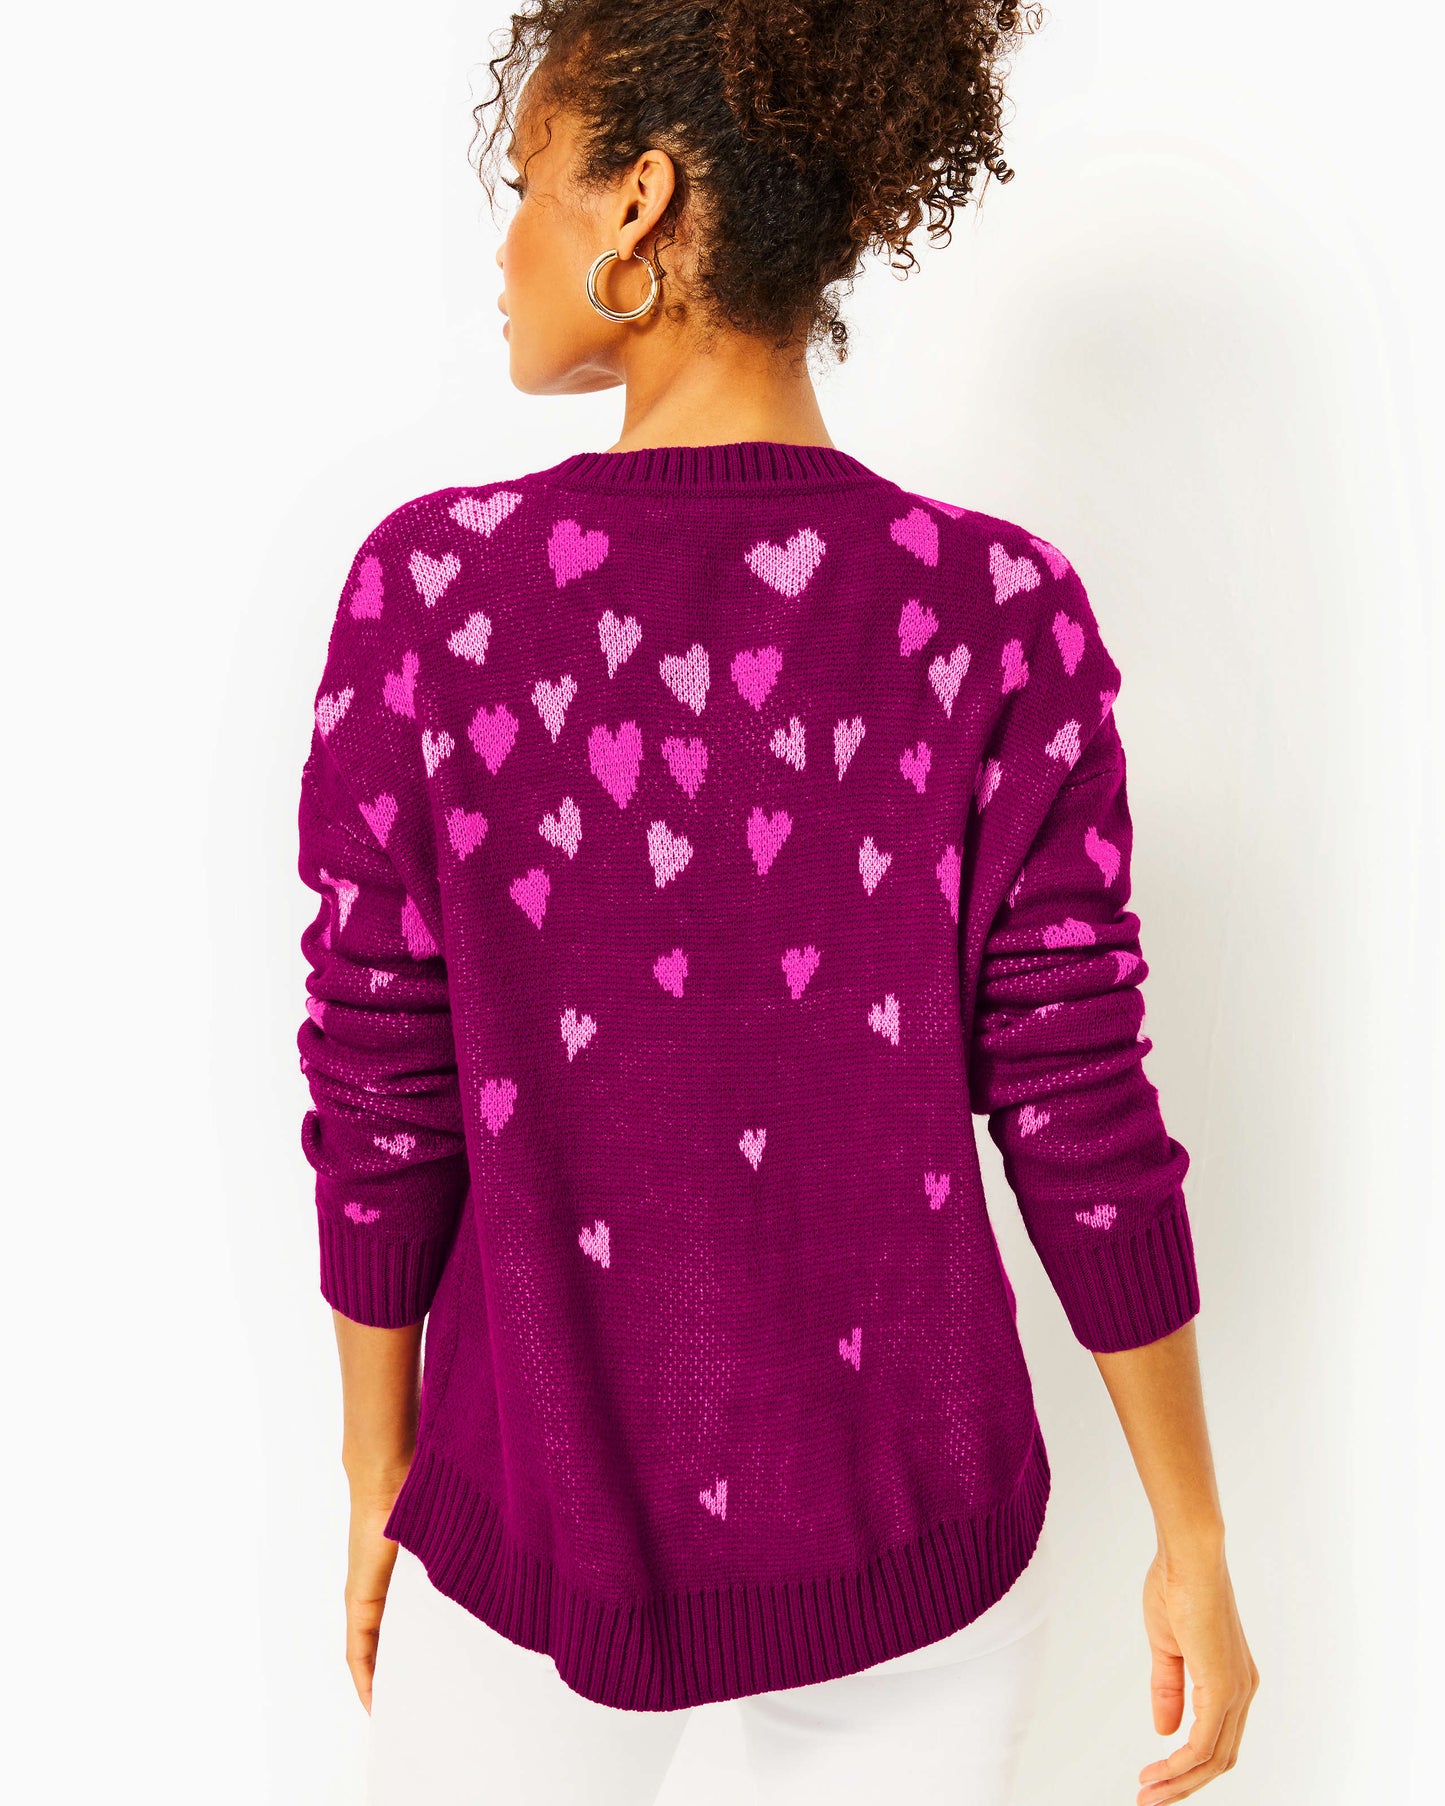 ELIZABELLE SWEATER - MULBERRY - OMBRE HEART JACQUARD